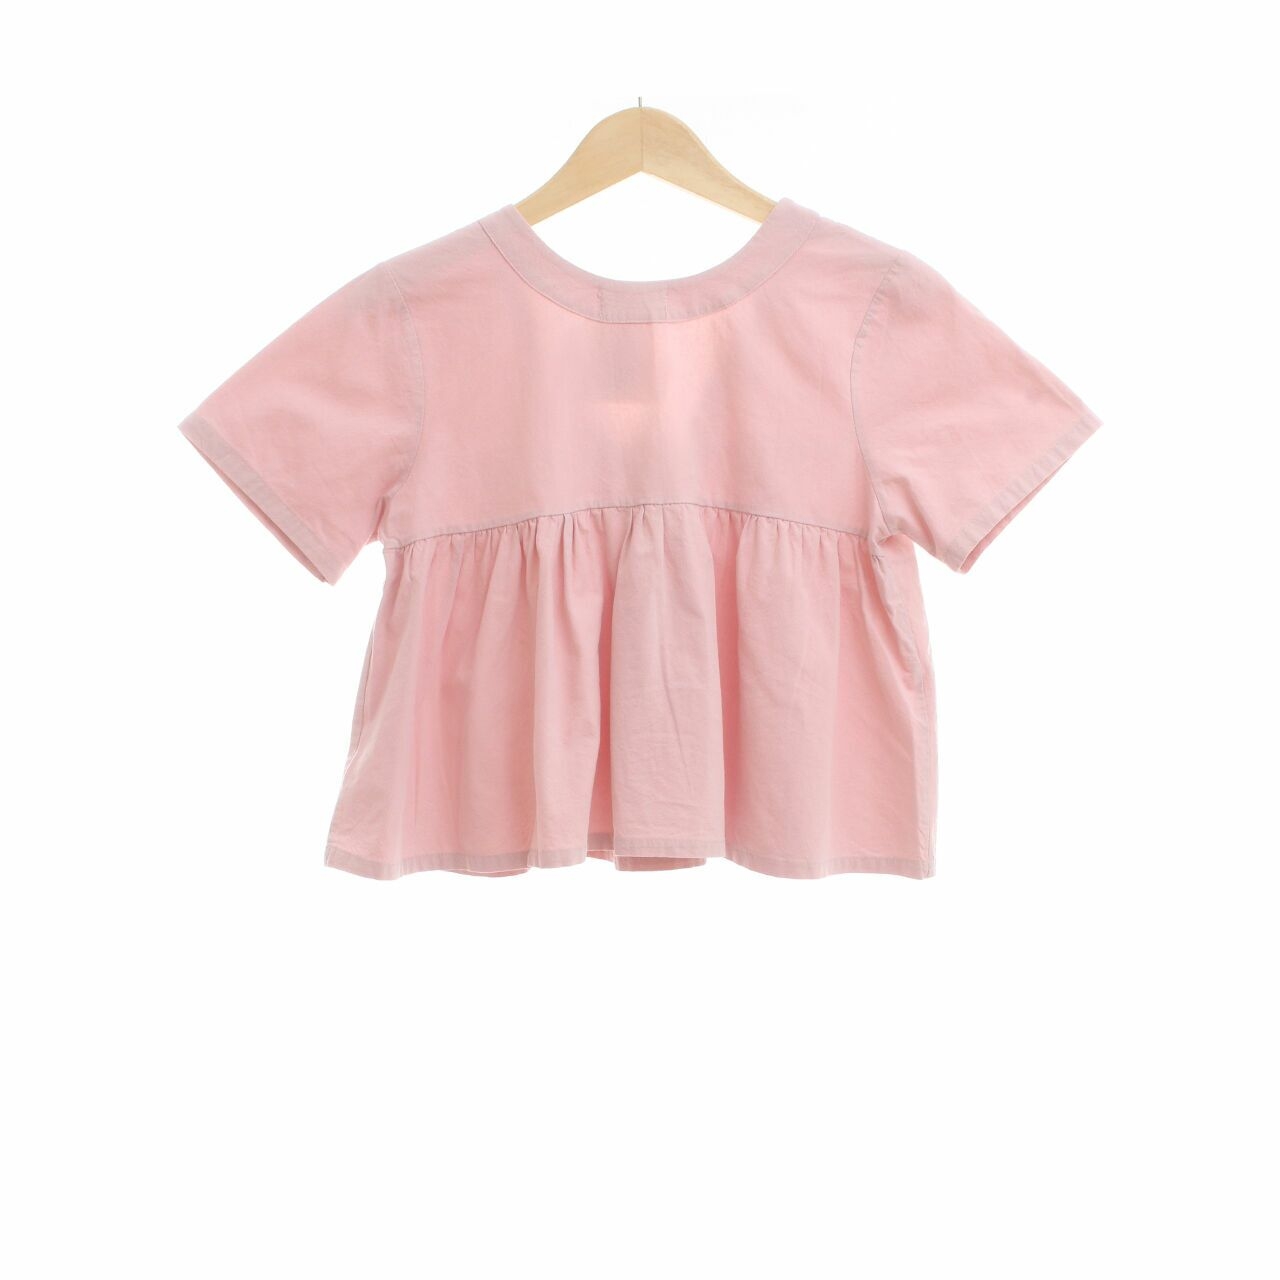 This is April Pink Pastel Blouse